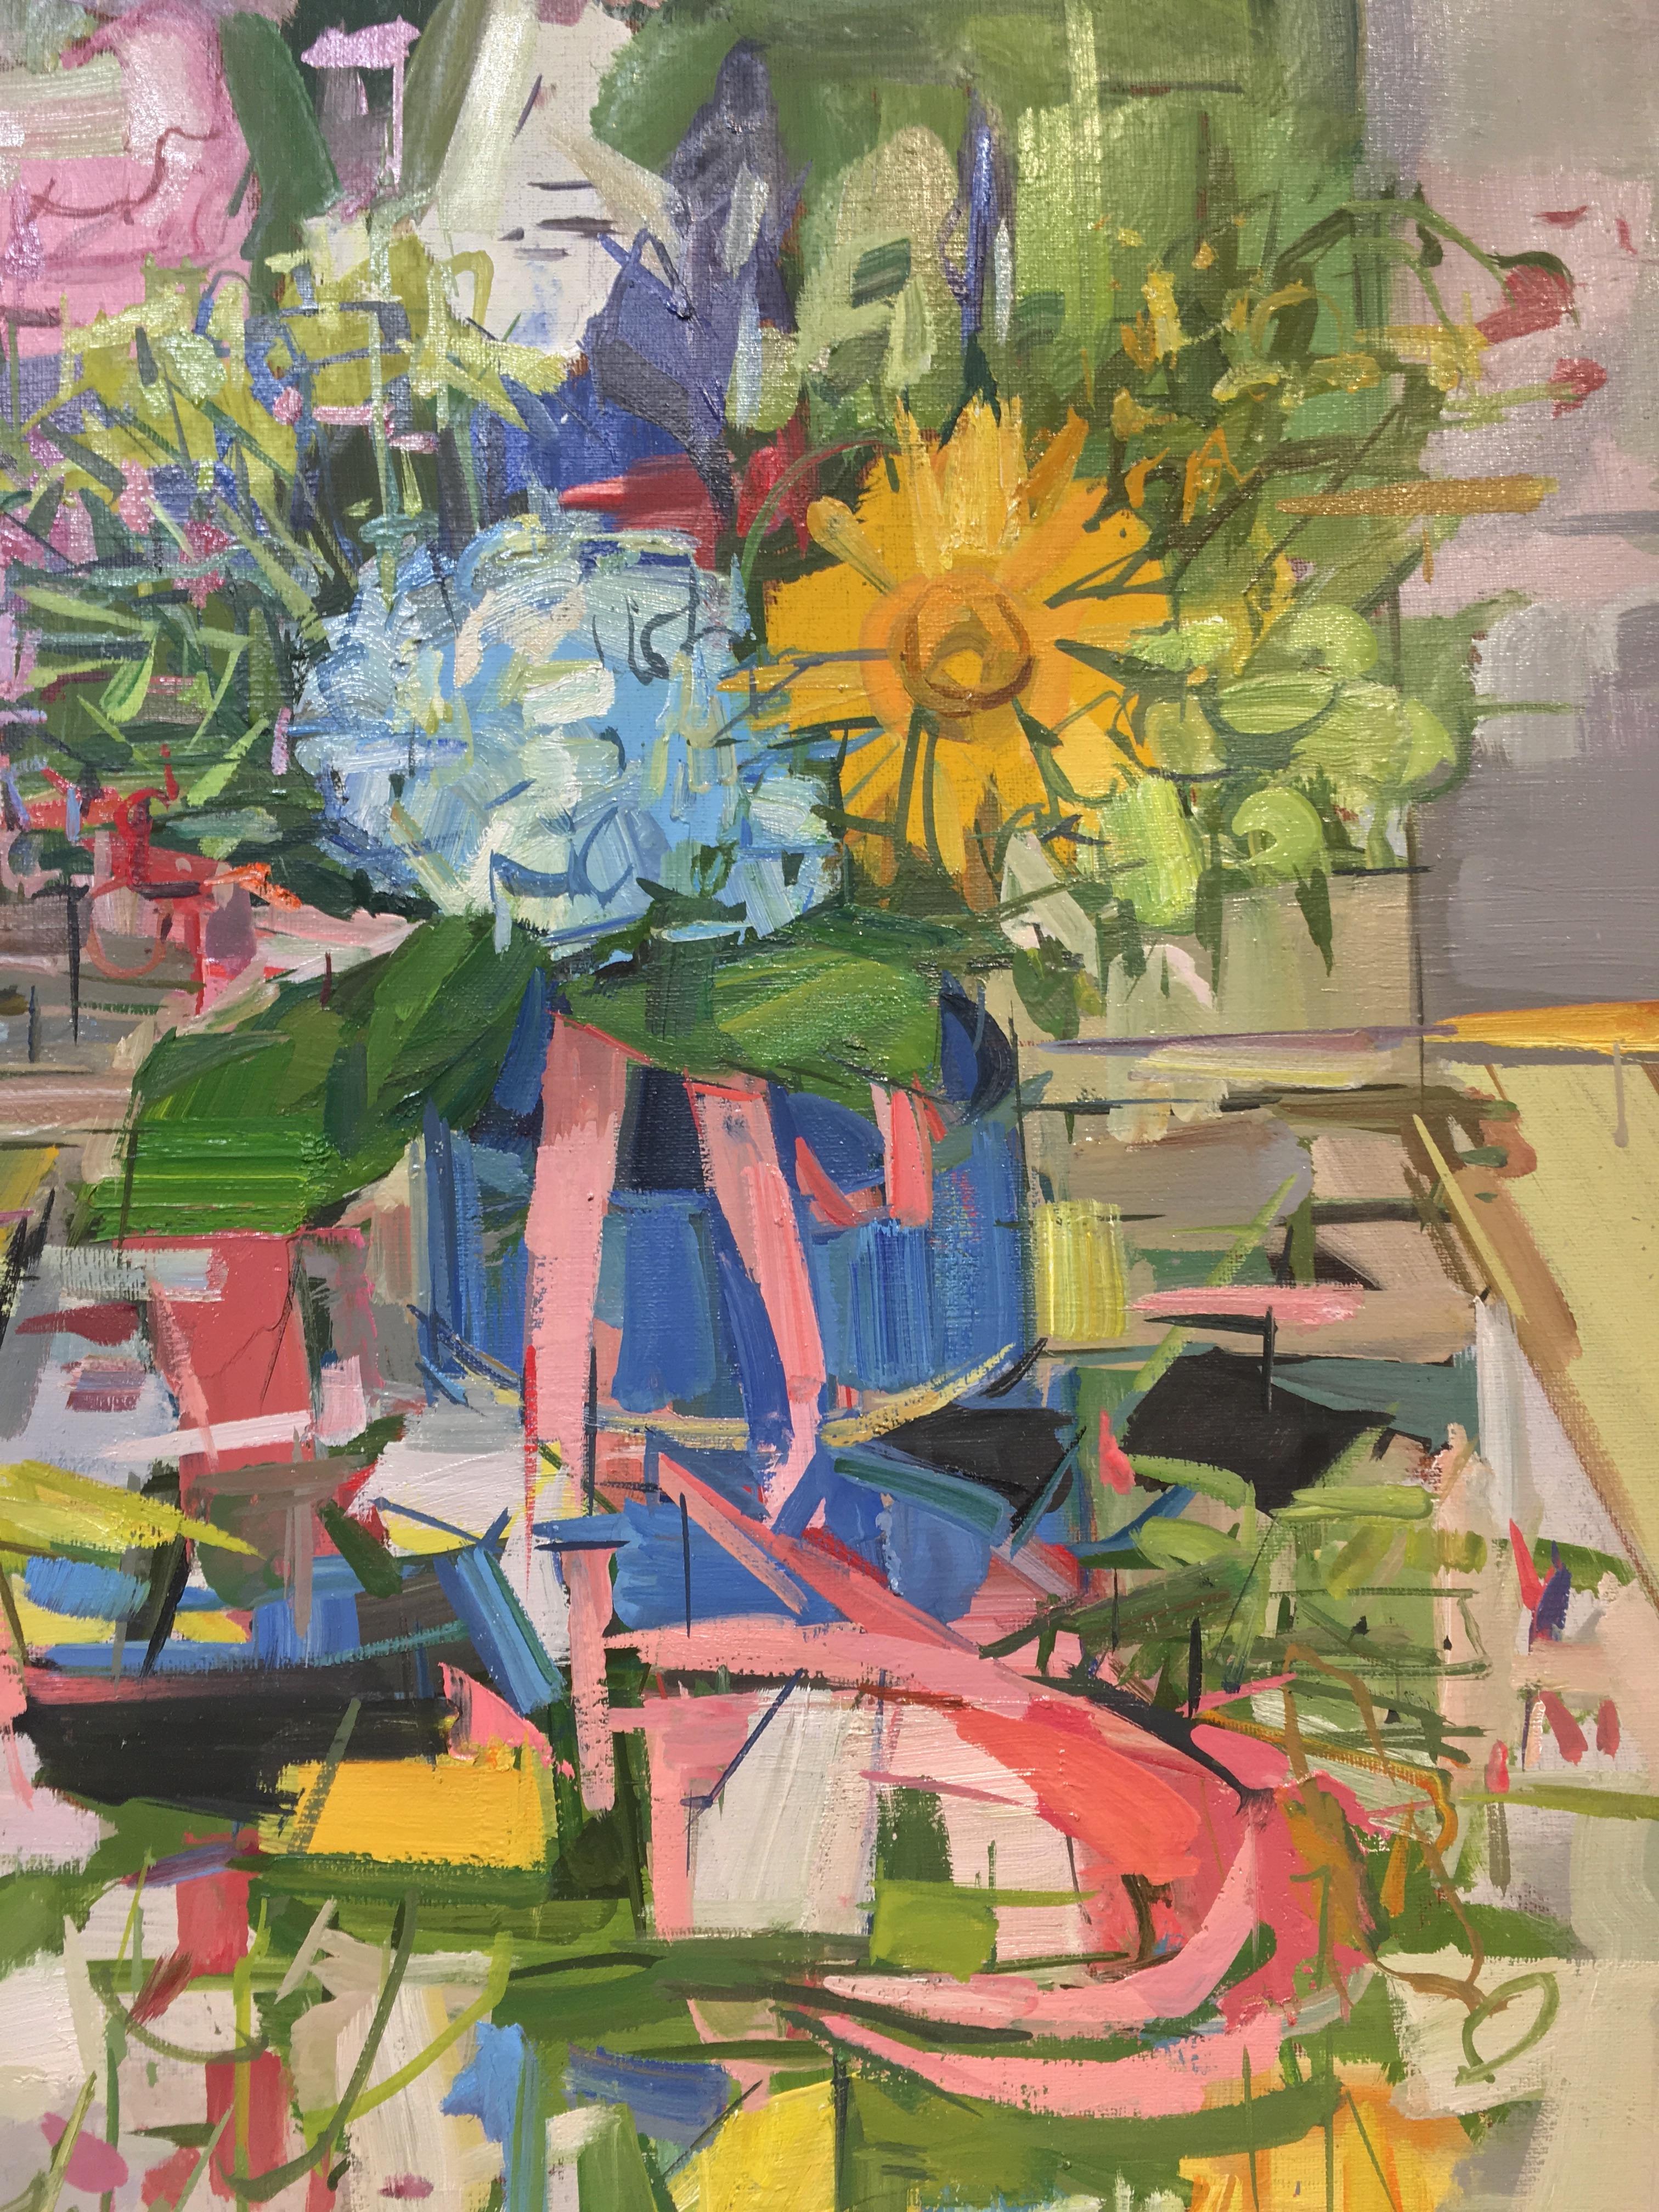 Floral Still Life II, Yellow, Blue, Pink and Green Flowers in Vase on Table 1